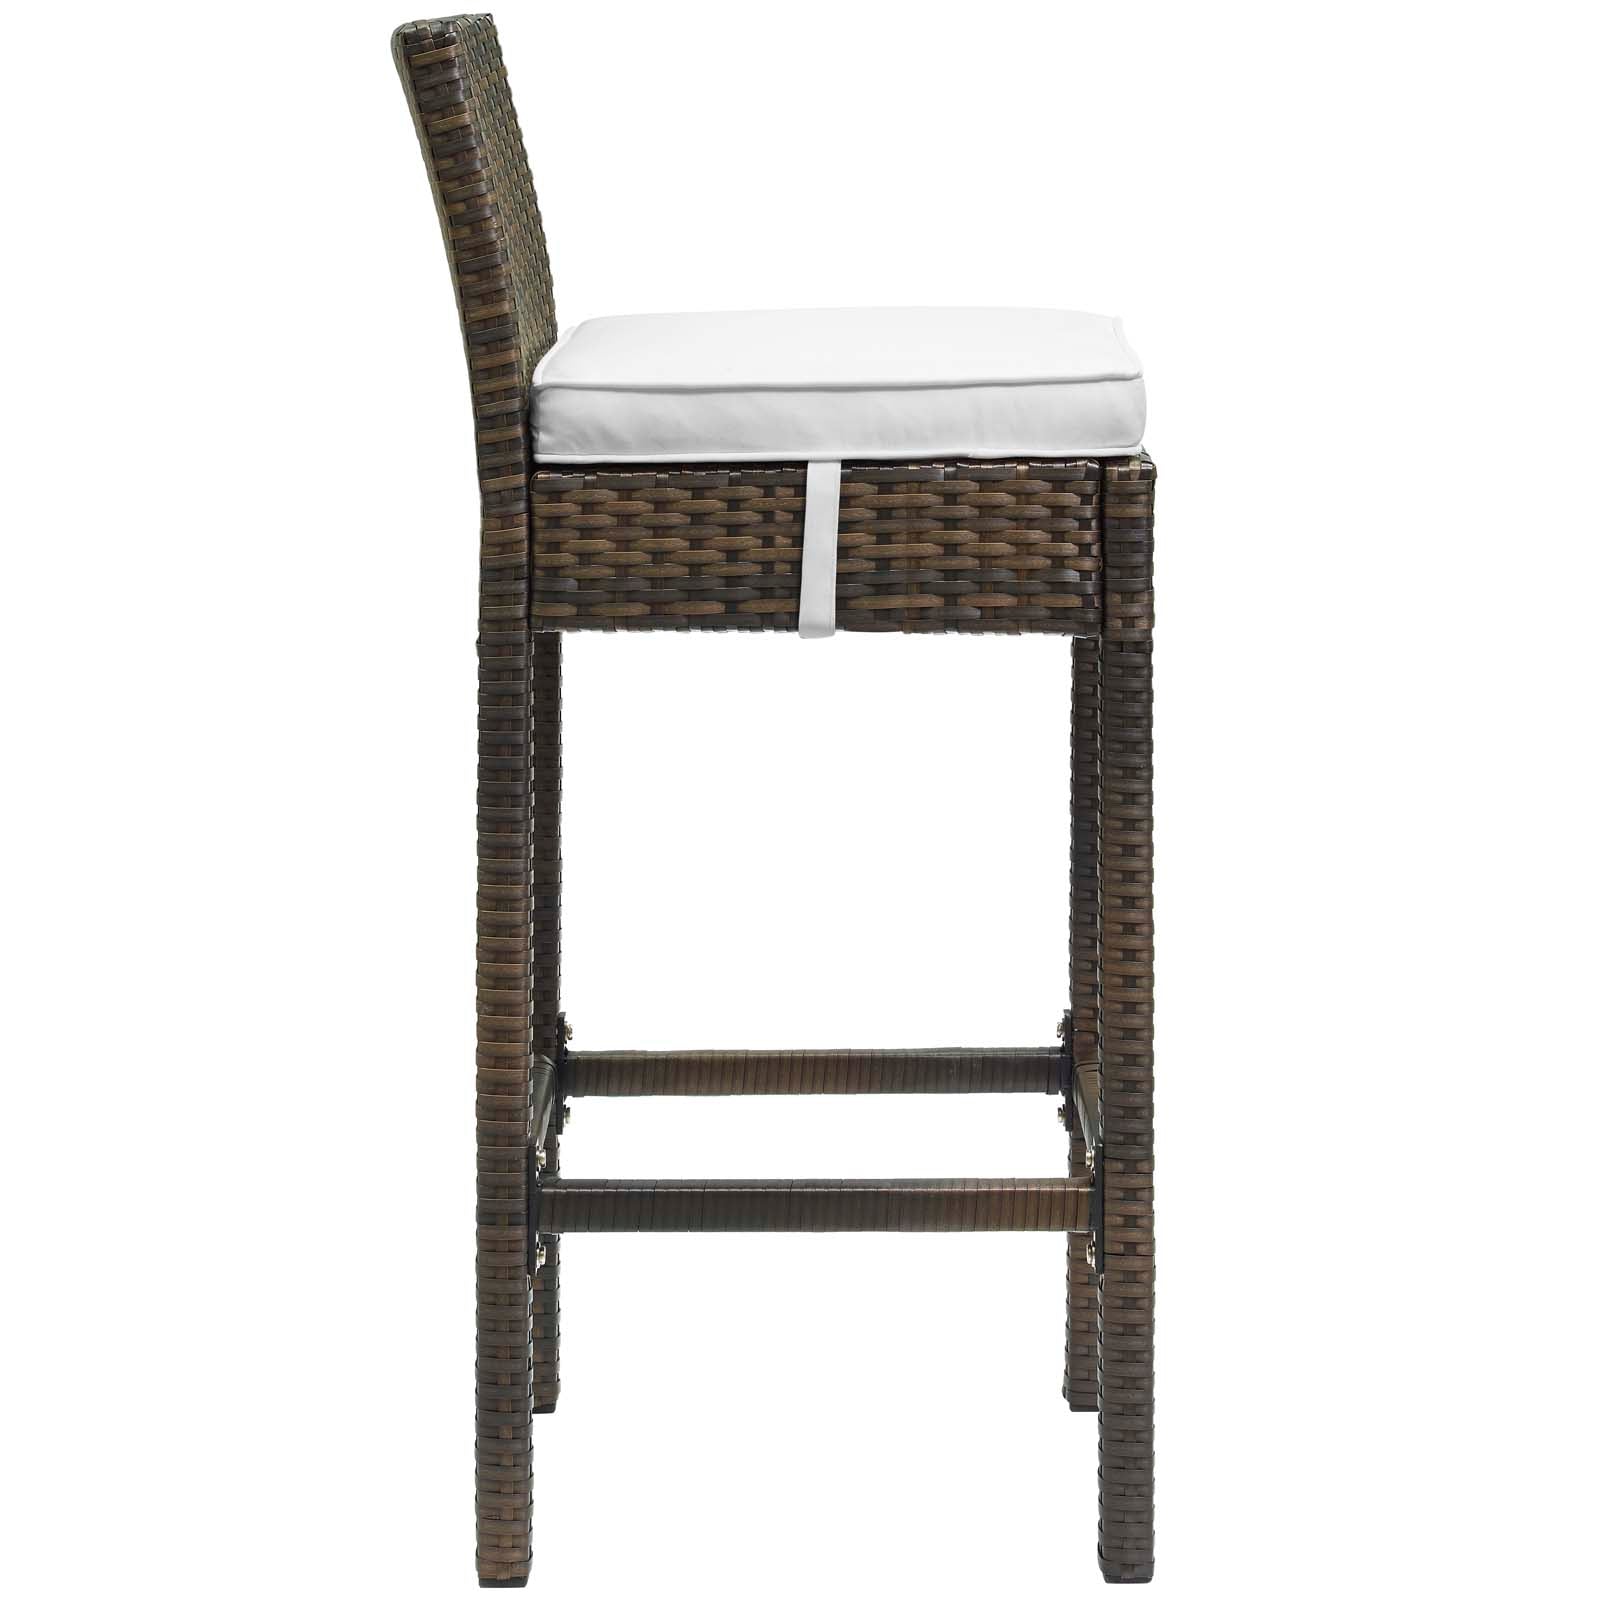 Modway Outdoor Barstools - Conduit Outdoor Patio Wicker Rattan Bar Stool Brown White